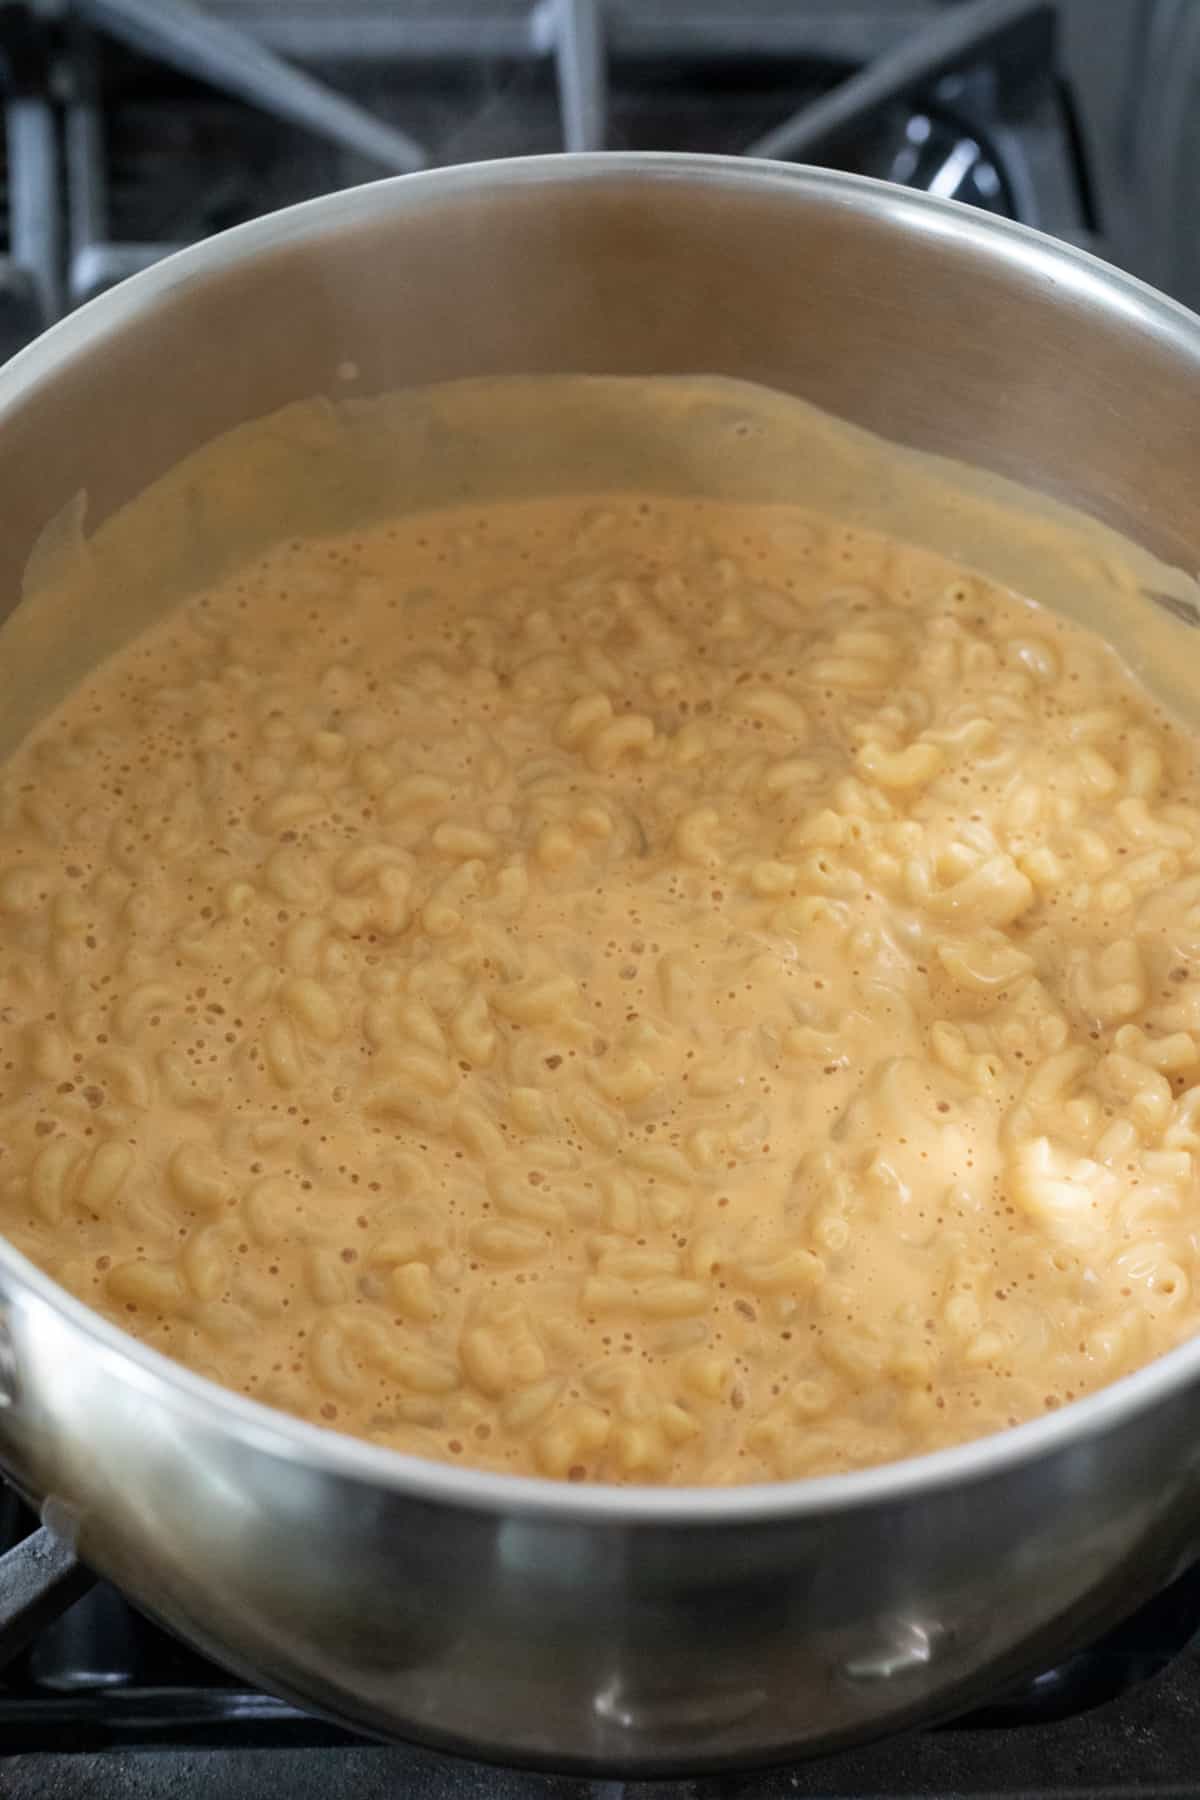 heating sunflower seed cheese sauce with cooked macaroni noodles.